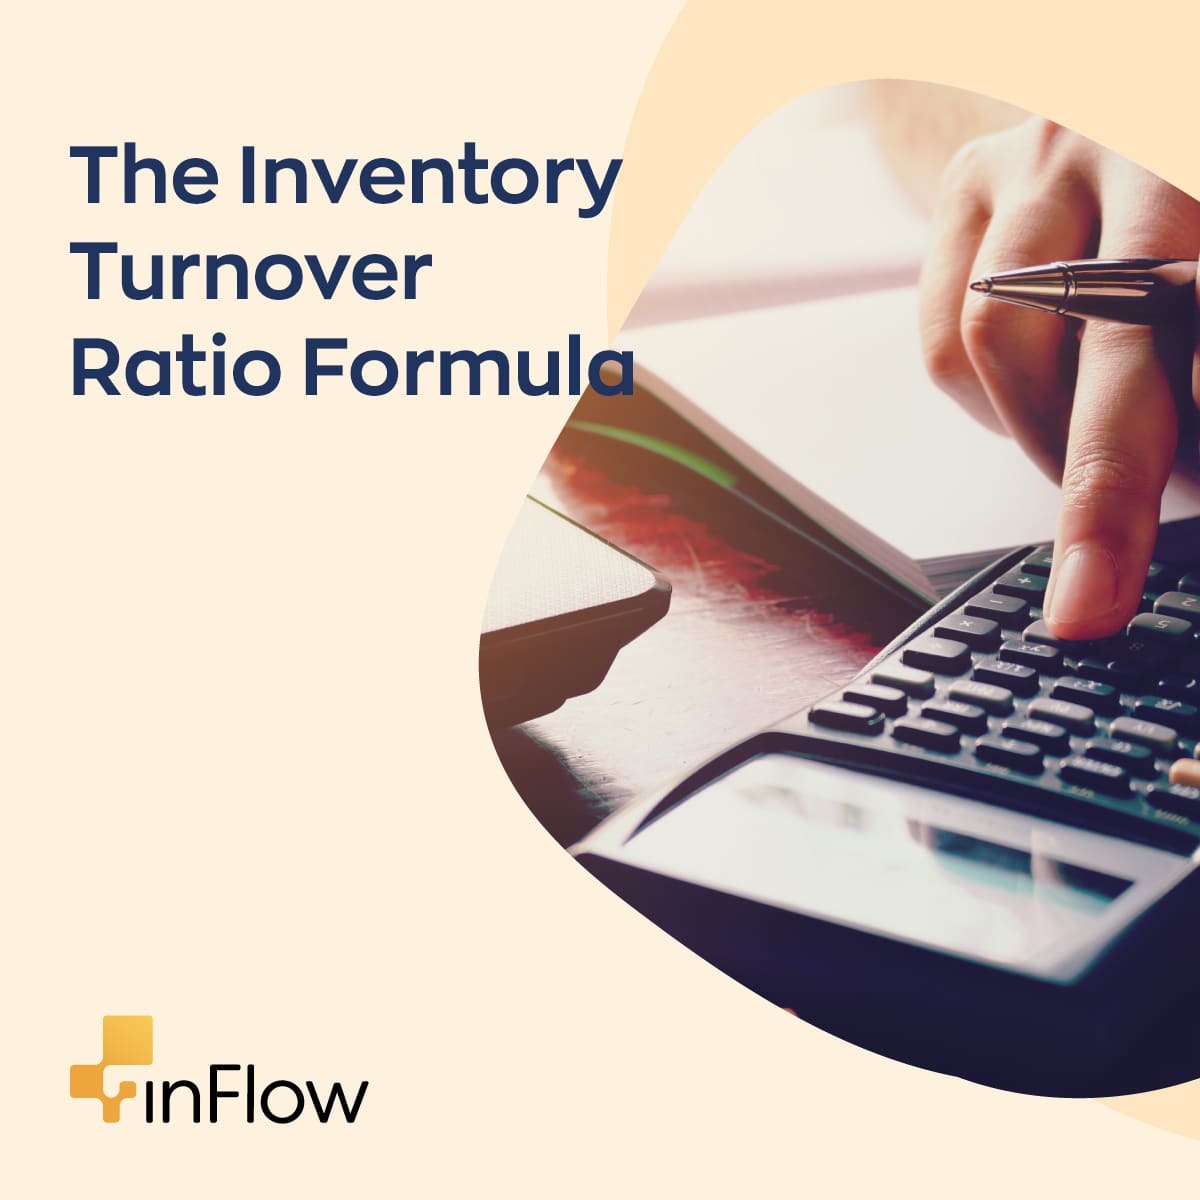 Use This Simple Formula to Calculate Inventory Turnover Ratio